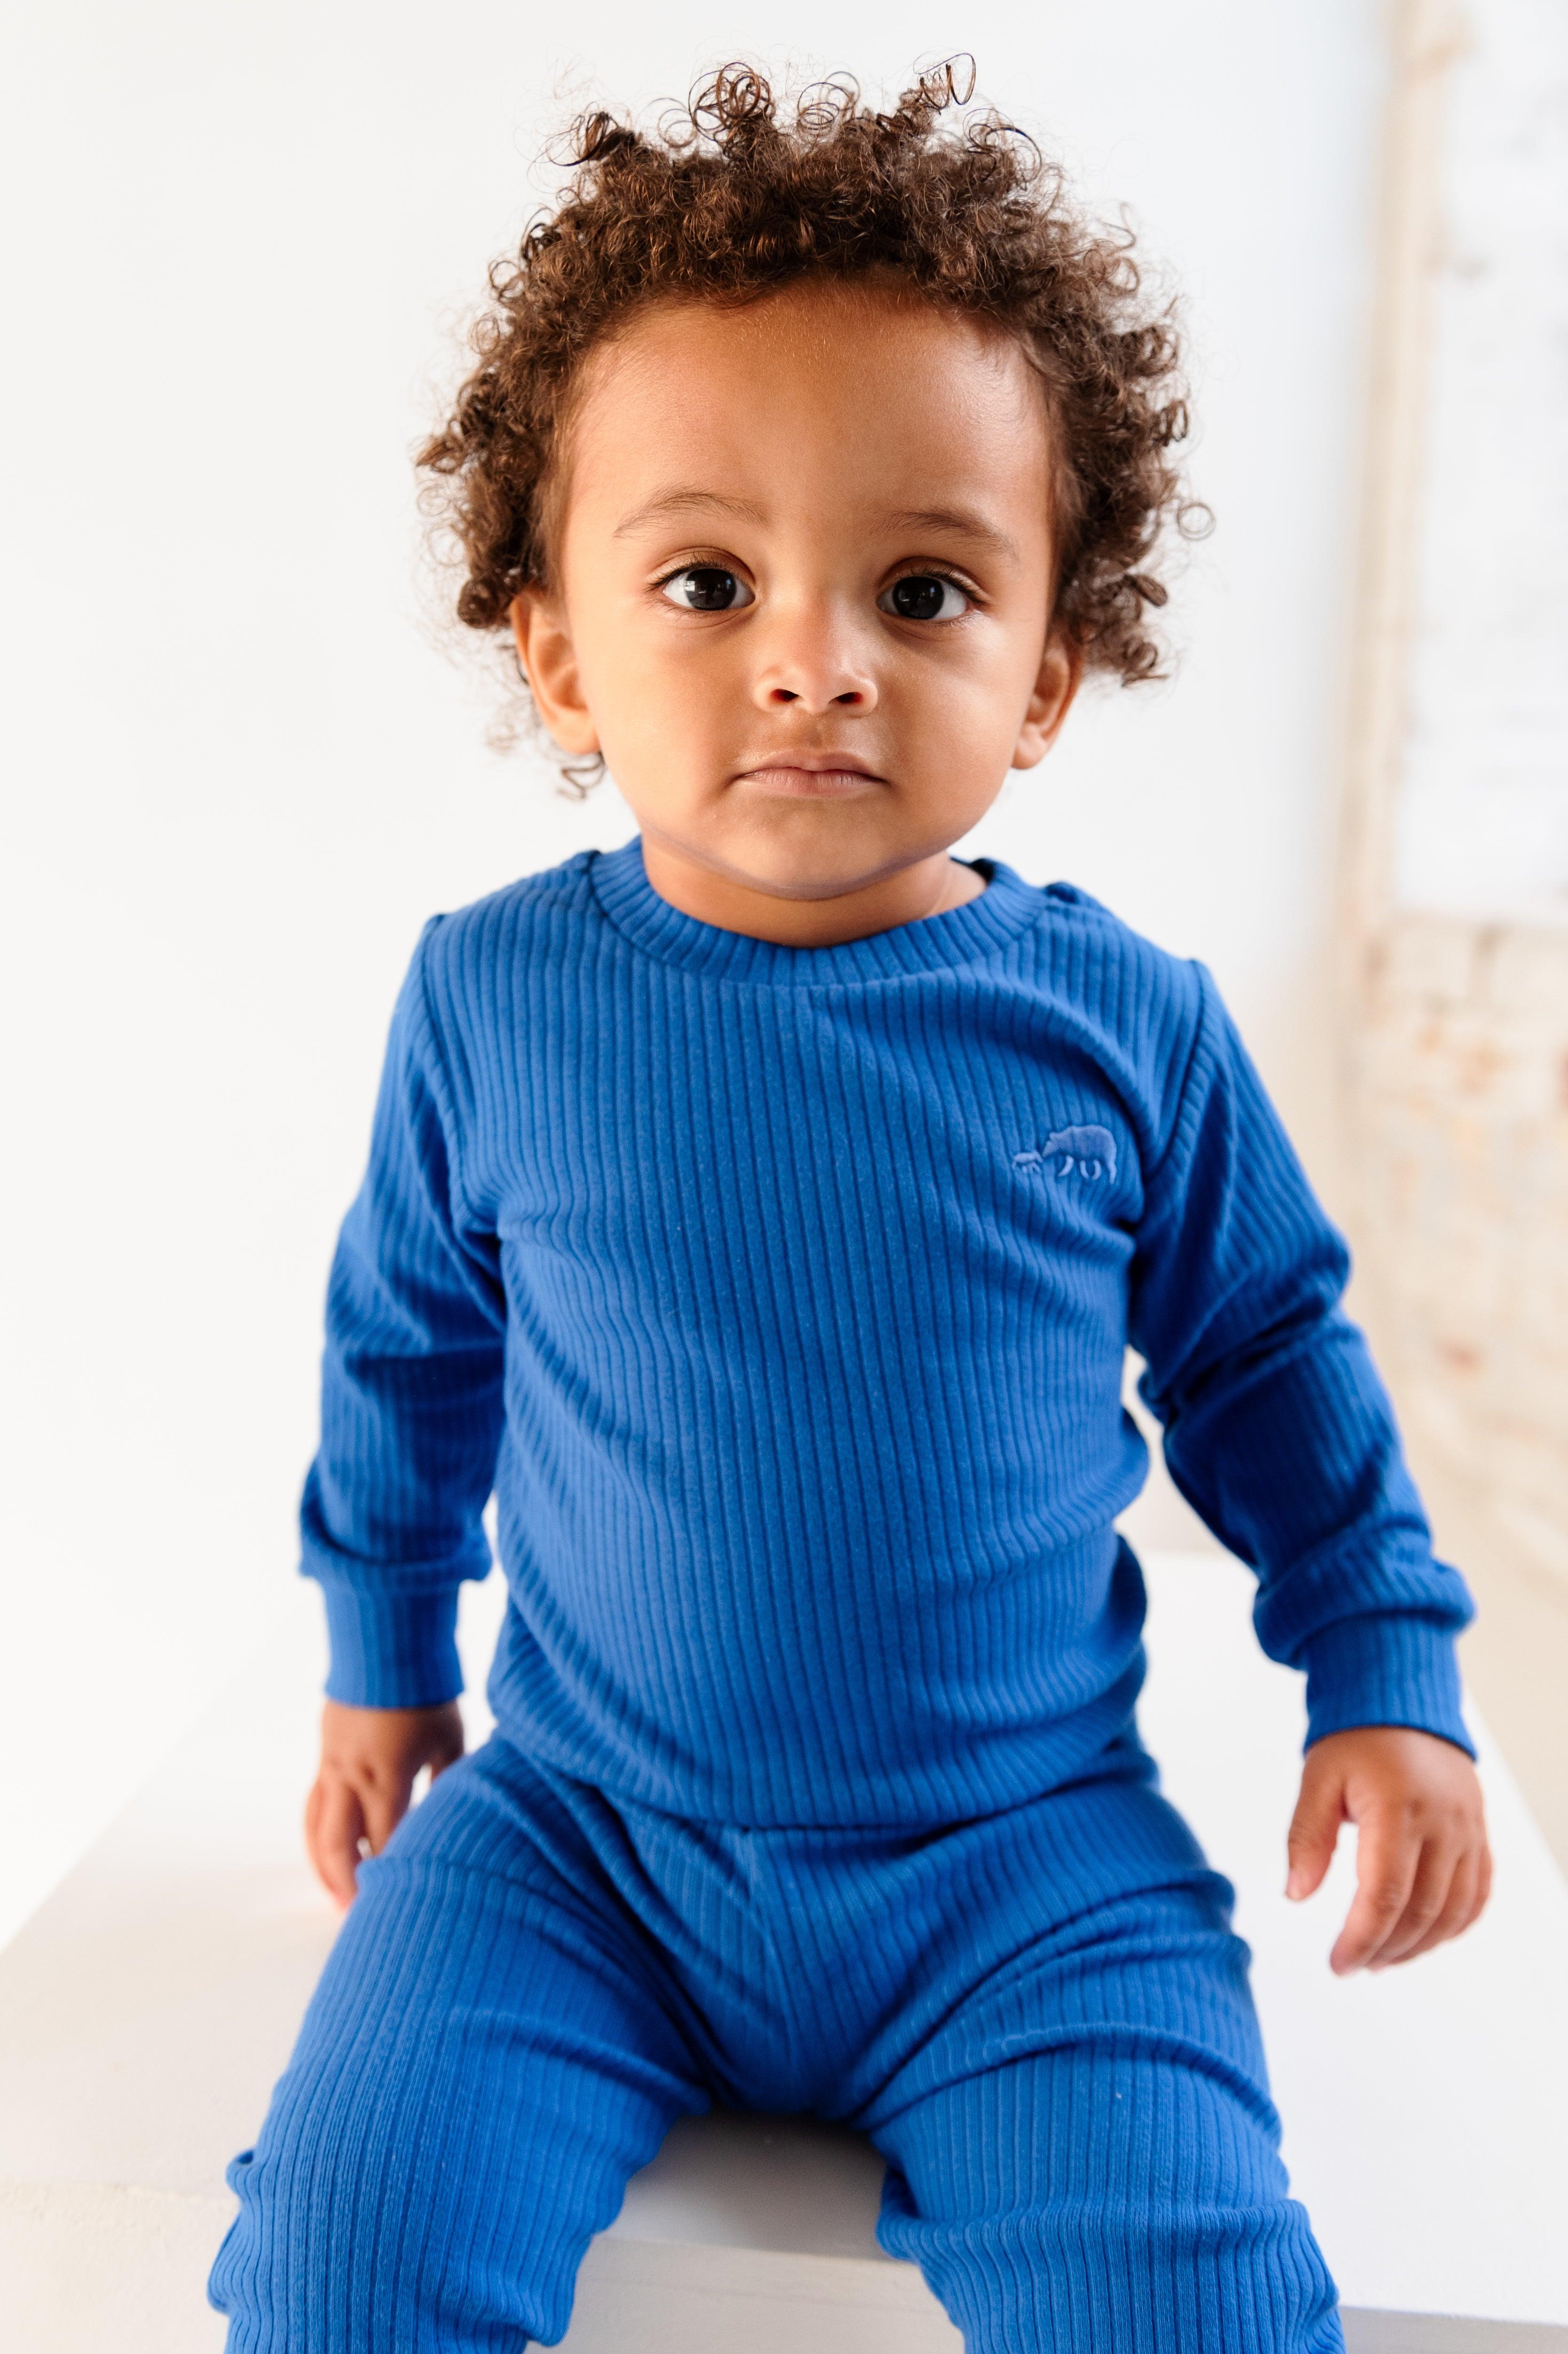 files/bright-blue-ribbed-long-sleeve-top-claybearofficial-7.jpg